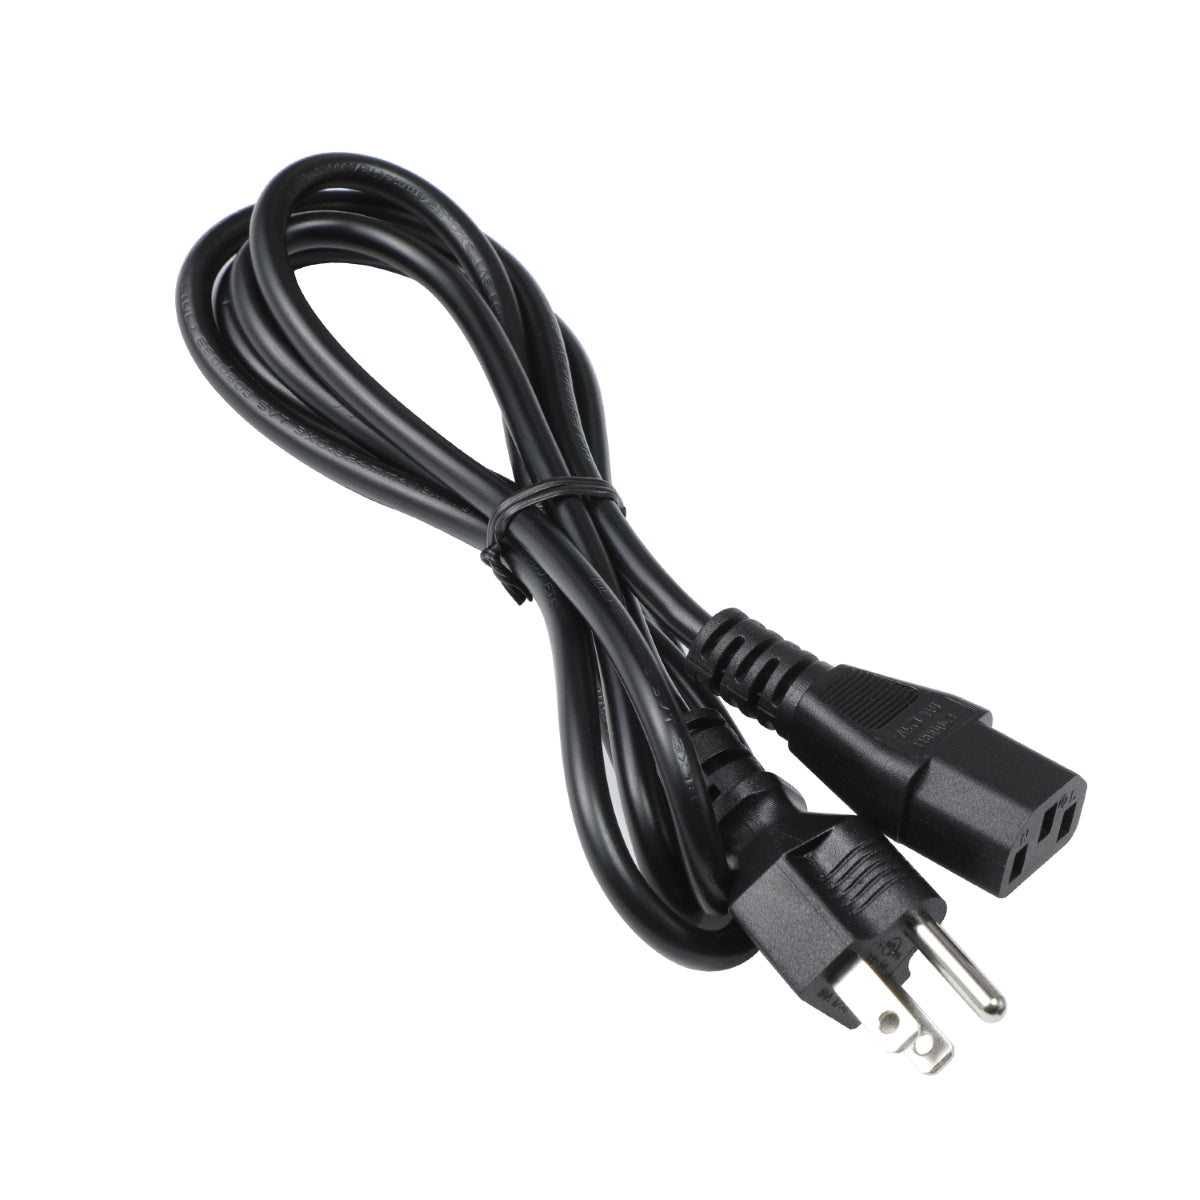 Power Cord for HP Pavilion 550-182 Computer.